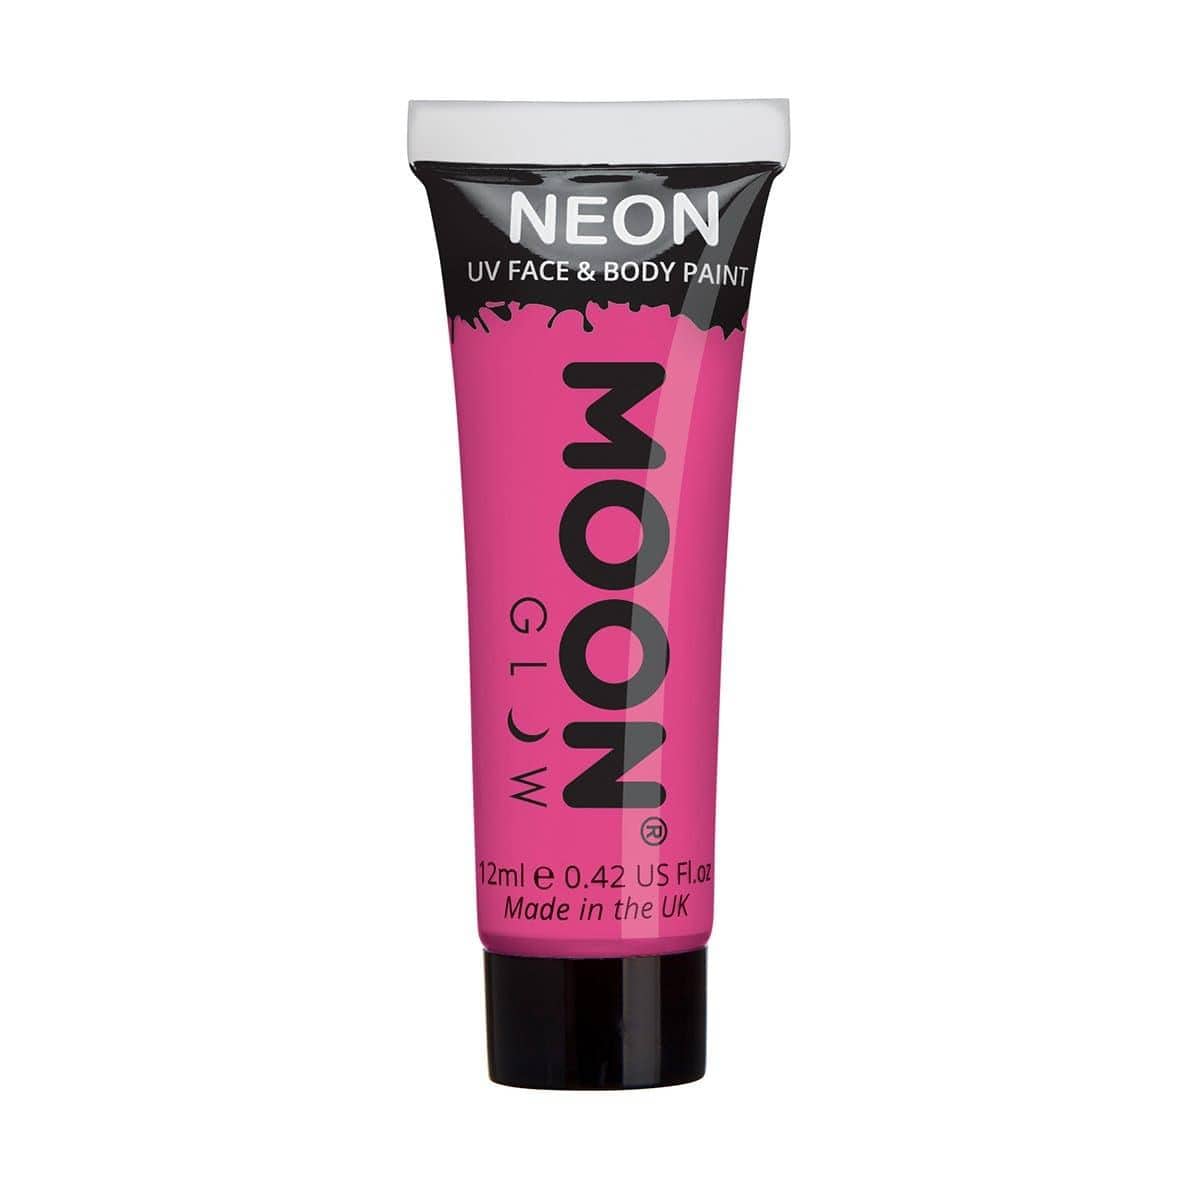 Buy Costume Accessories Moon pink neon UV face & body paint sold at Party Expert